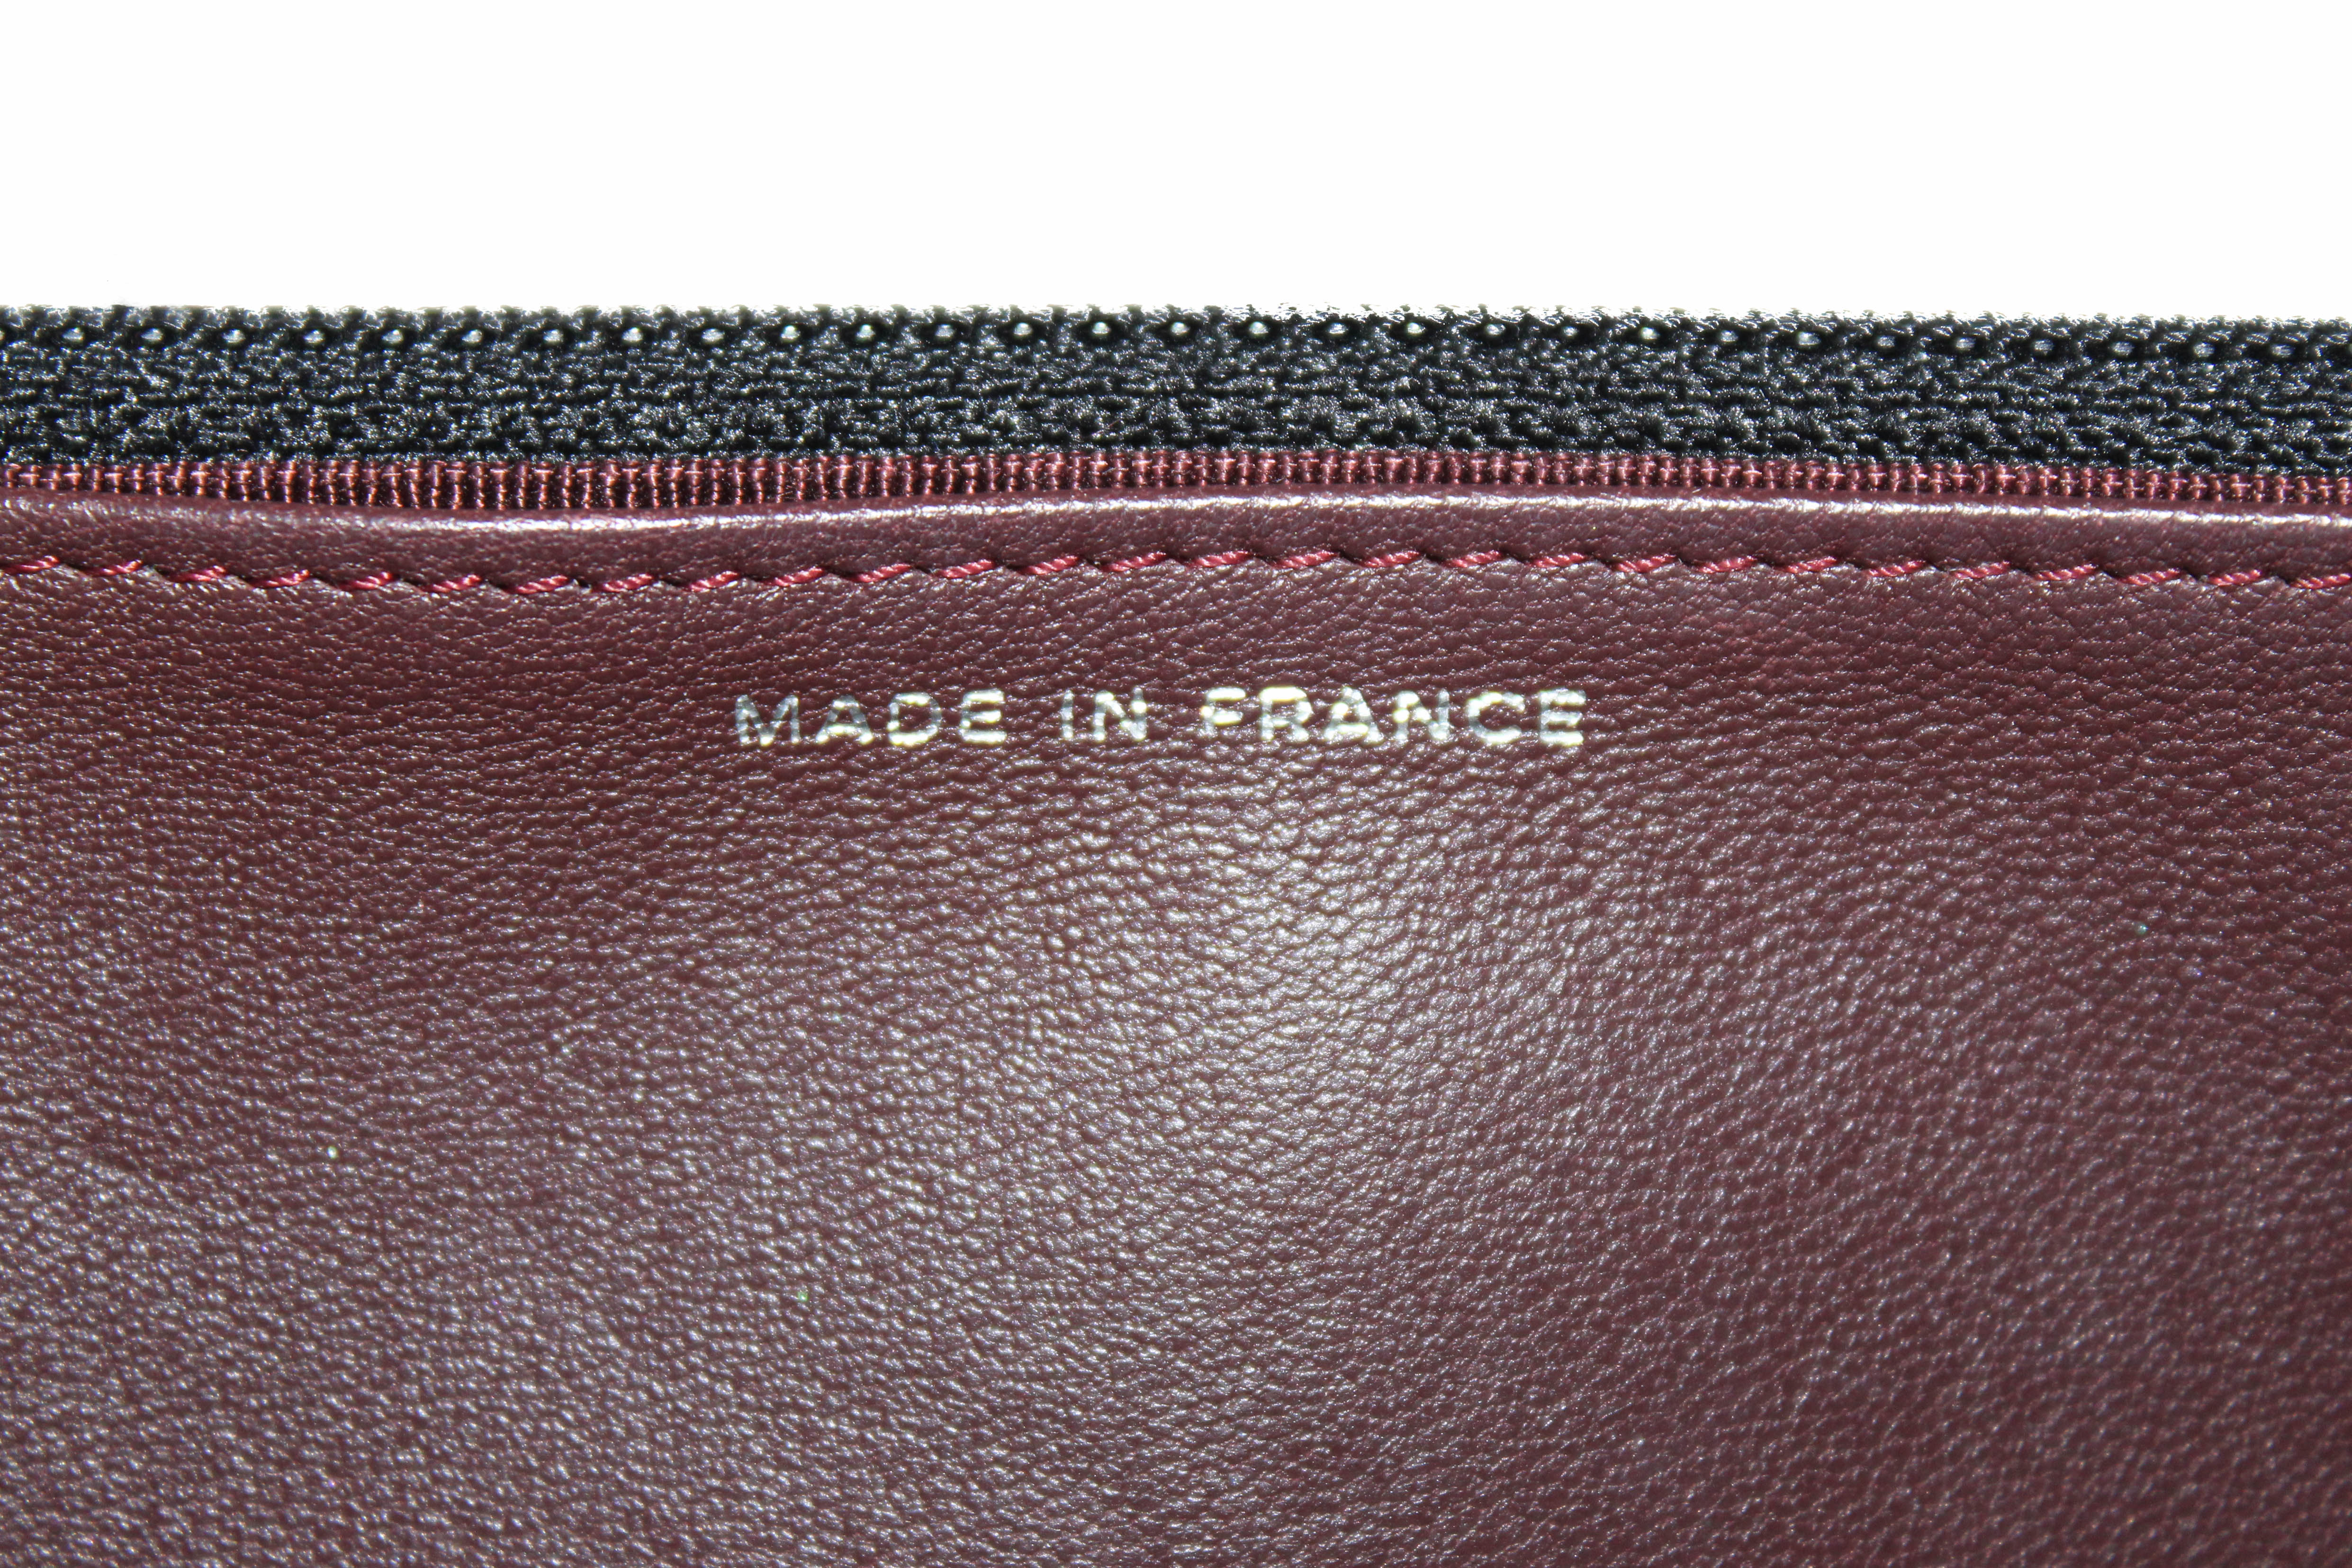 Chanel Burgundy Patent Leather Wallet on Chain WOC Messenger Bag – Italy  Station